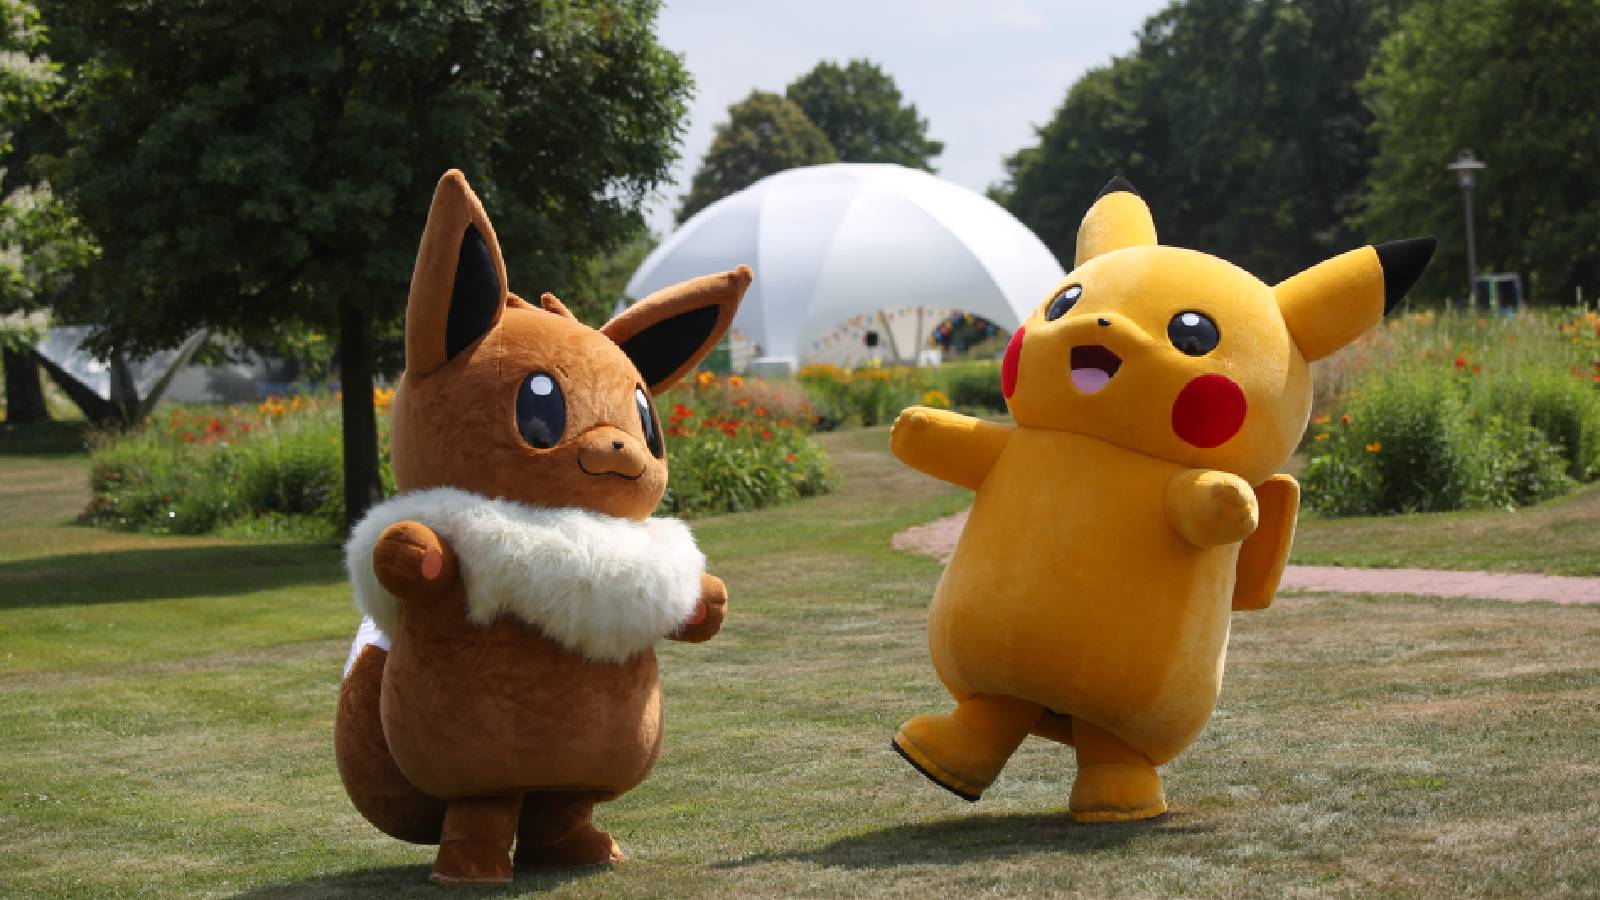 People in Pikachu and Eevee costumes play in a field